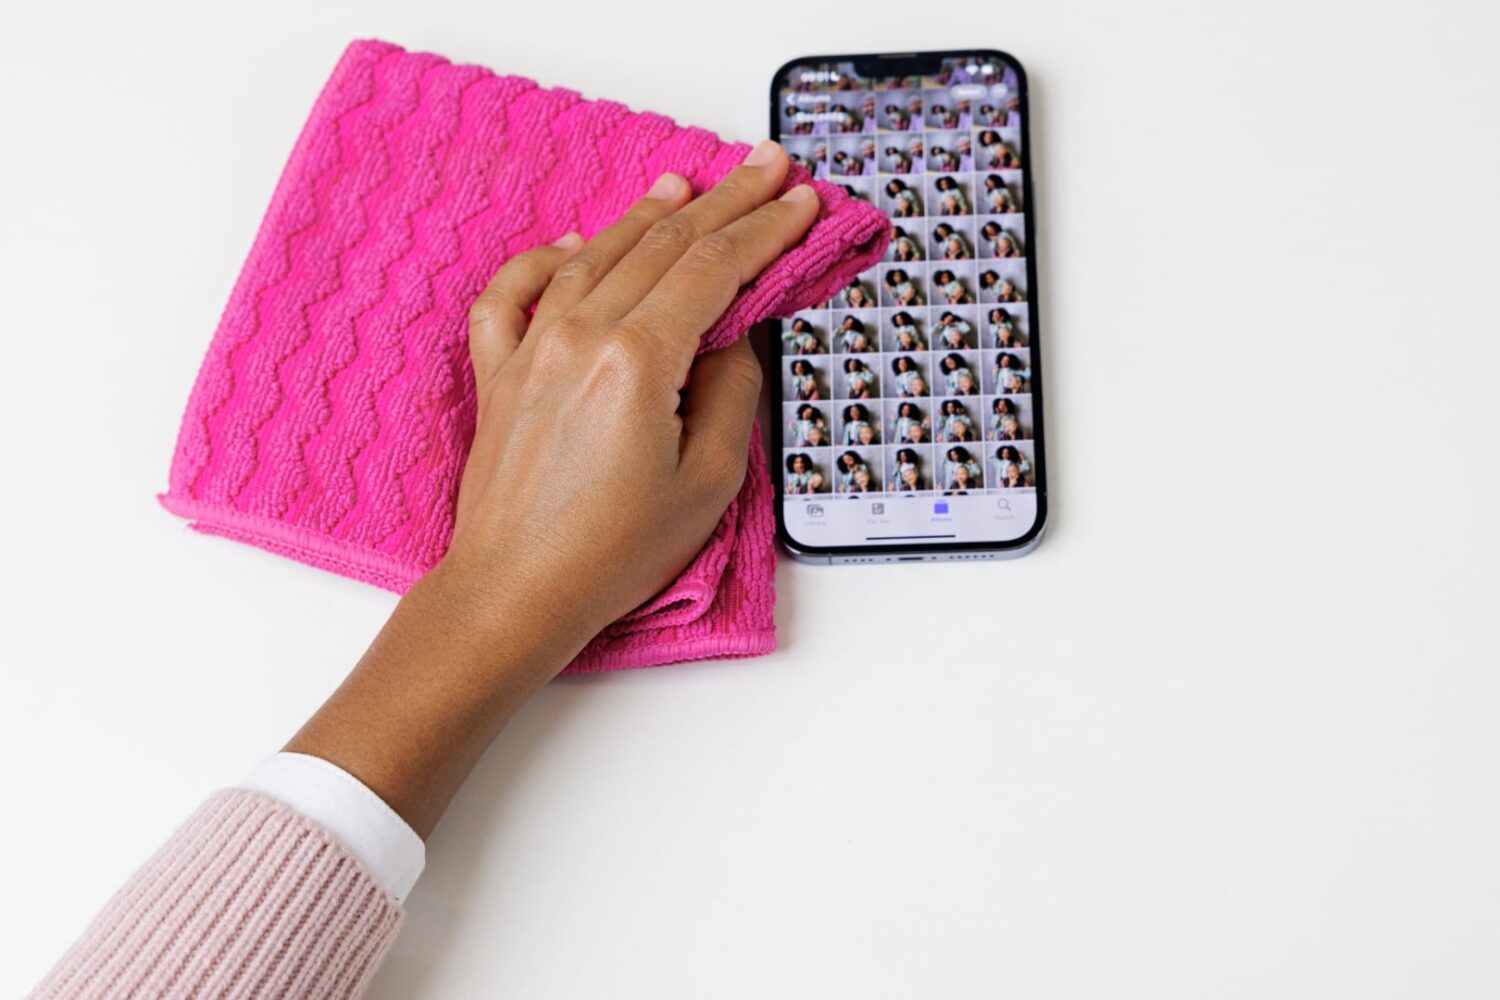 Female hand wiping an iPhone running the Photos app with a pink cleaning cloth